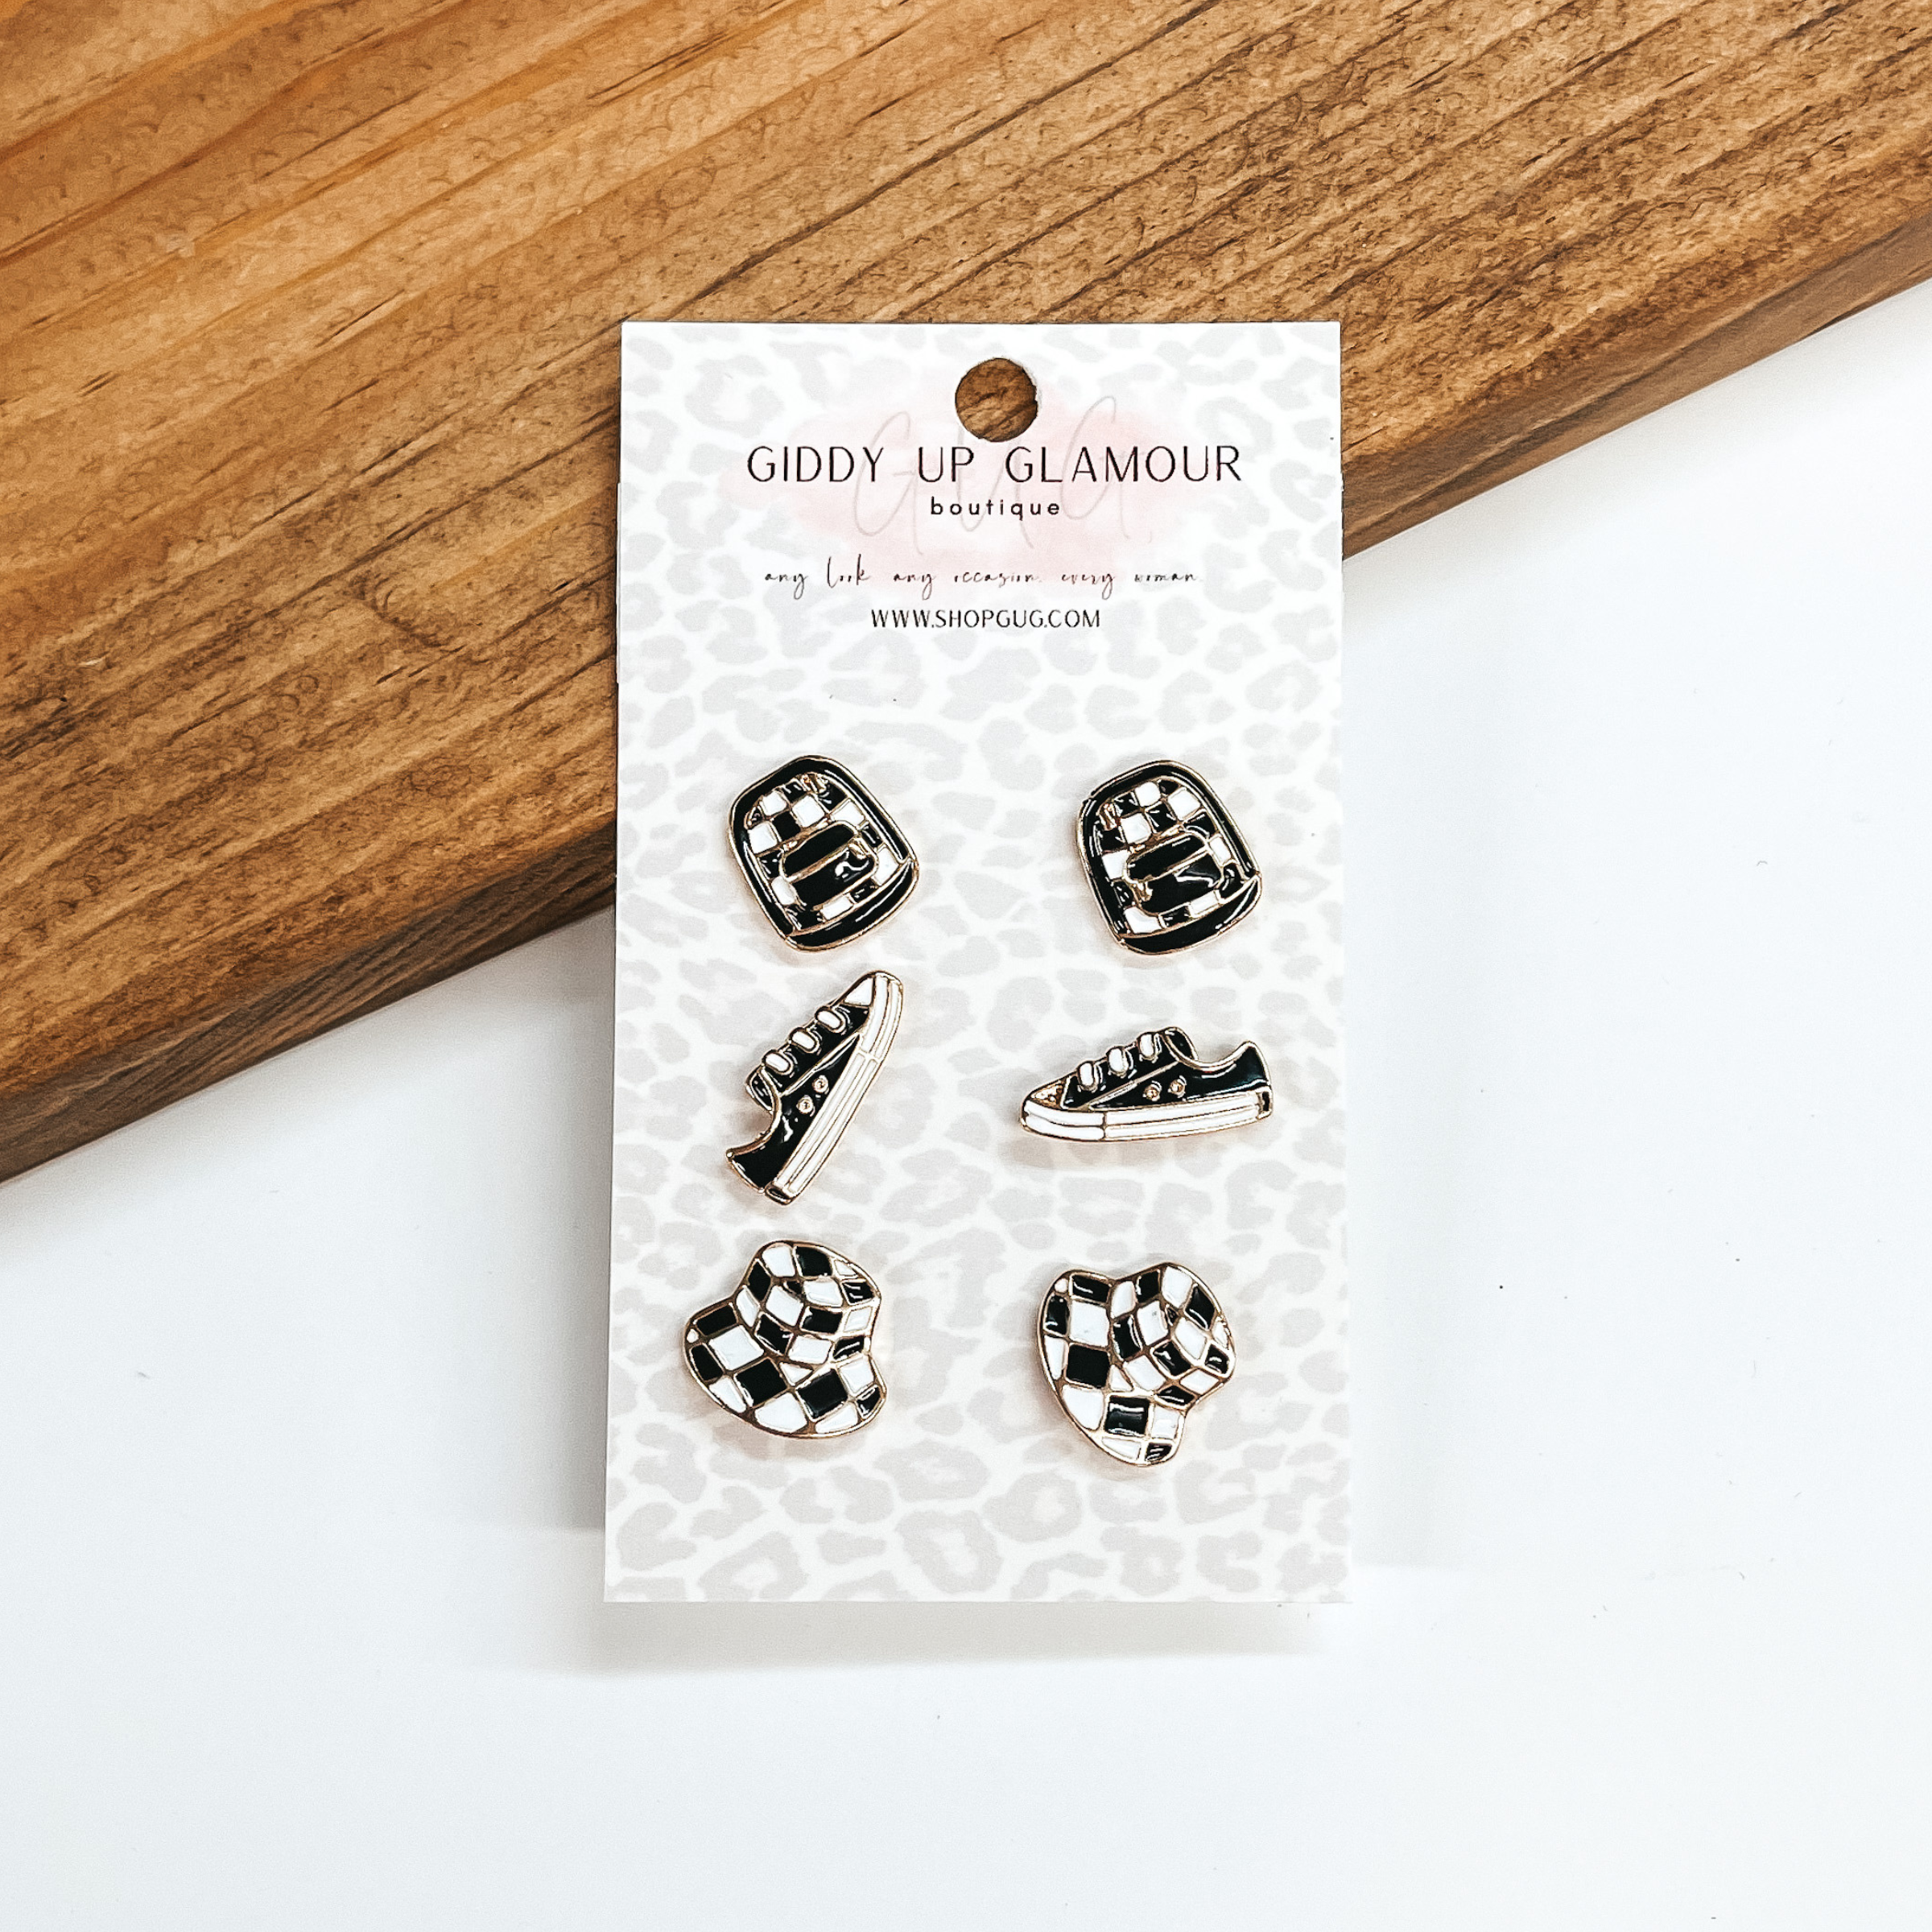 These are three set of stud earrings in black and  white checkered pattern. The bottom set are  bucket hats, the middle set are sneakers, and the  top set are backpacks. These earrings are taken on  a Giddy Up Glamour cardboard, a brown block and a  white background. 